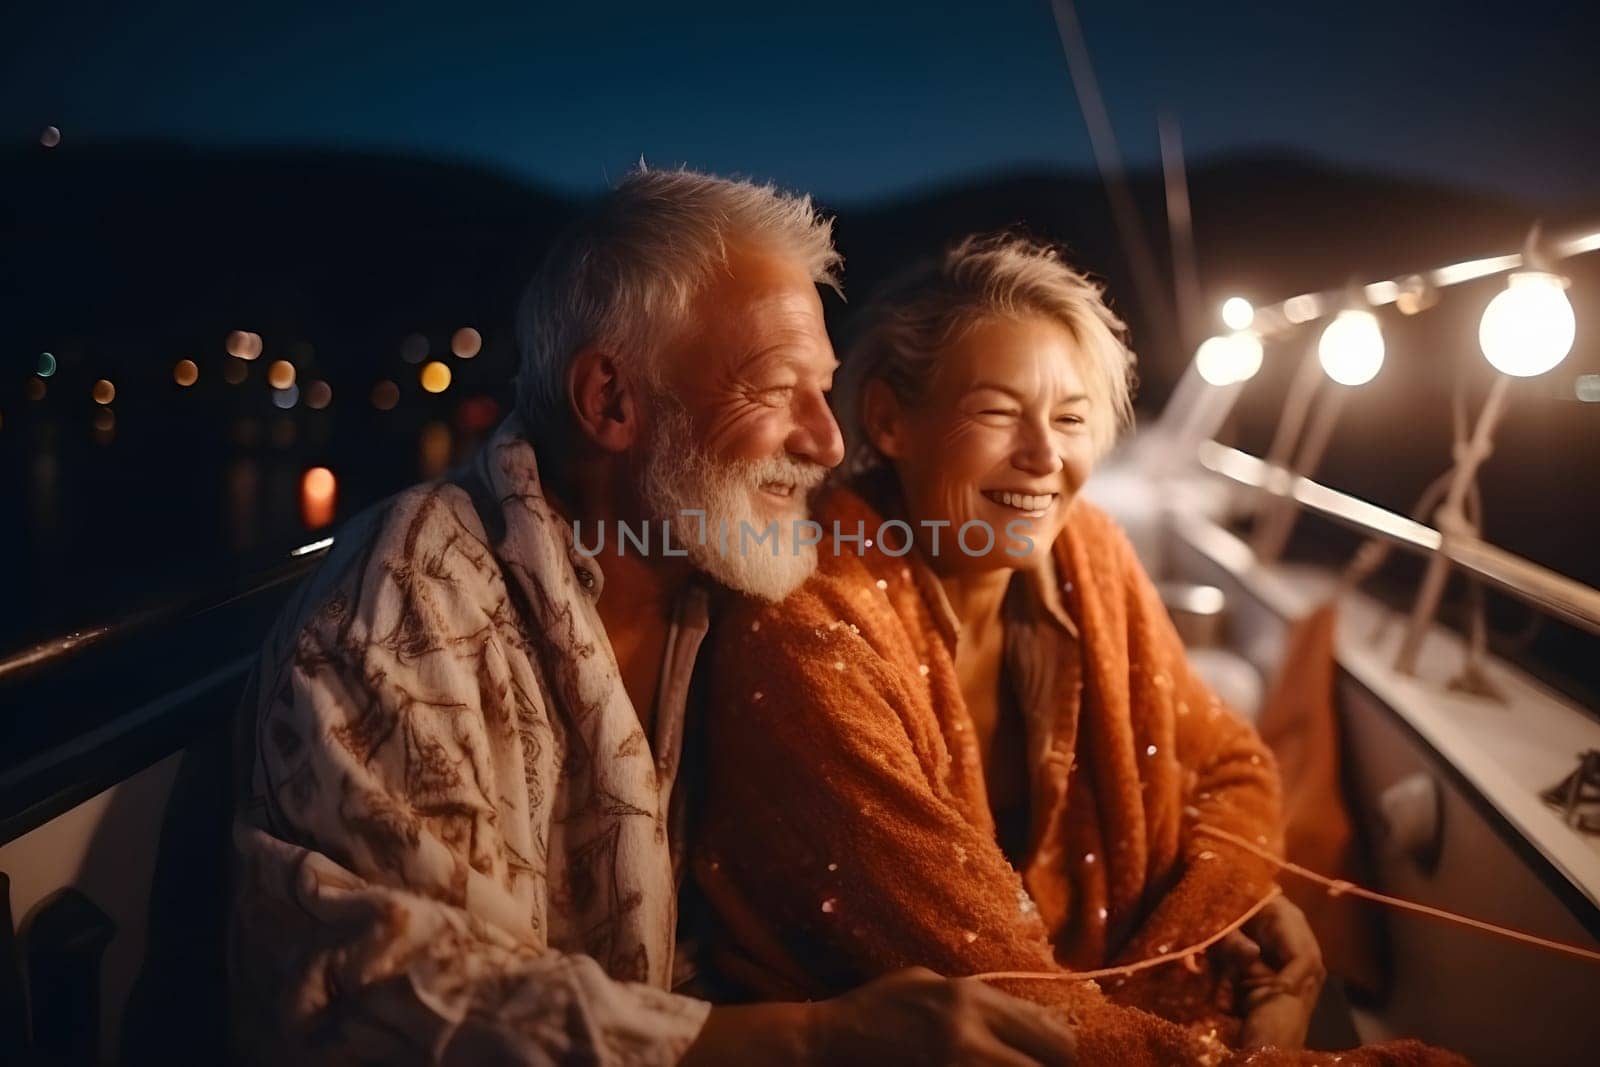 Beautiful and happy senior caucasian couple on a sailboat at night. Neural network generated in May 2023. Not based on any actual person, scene or pattern.